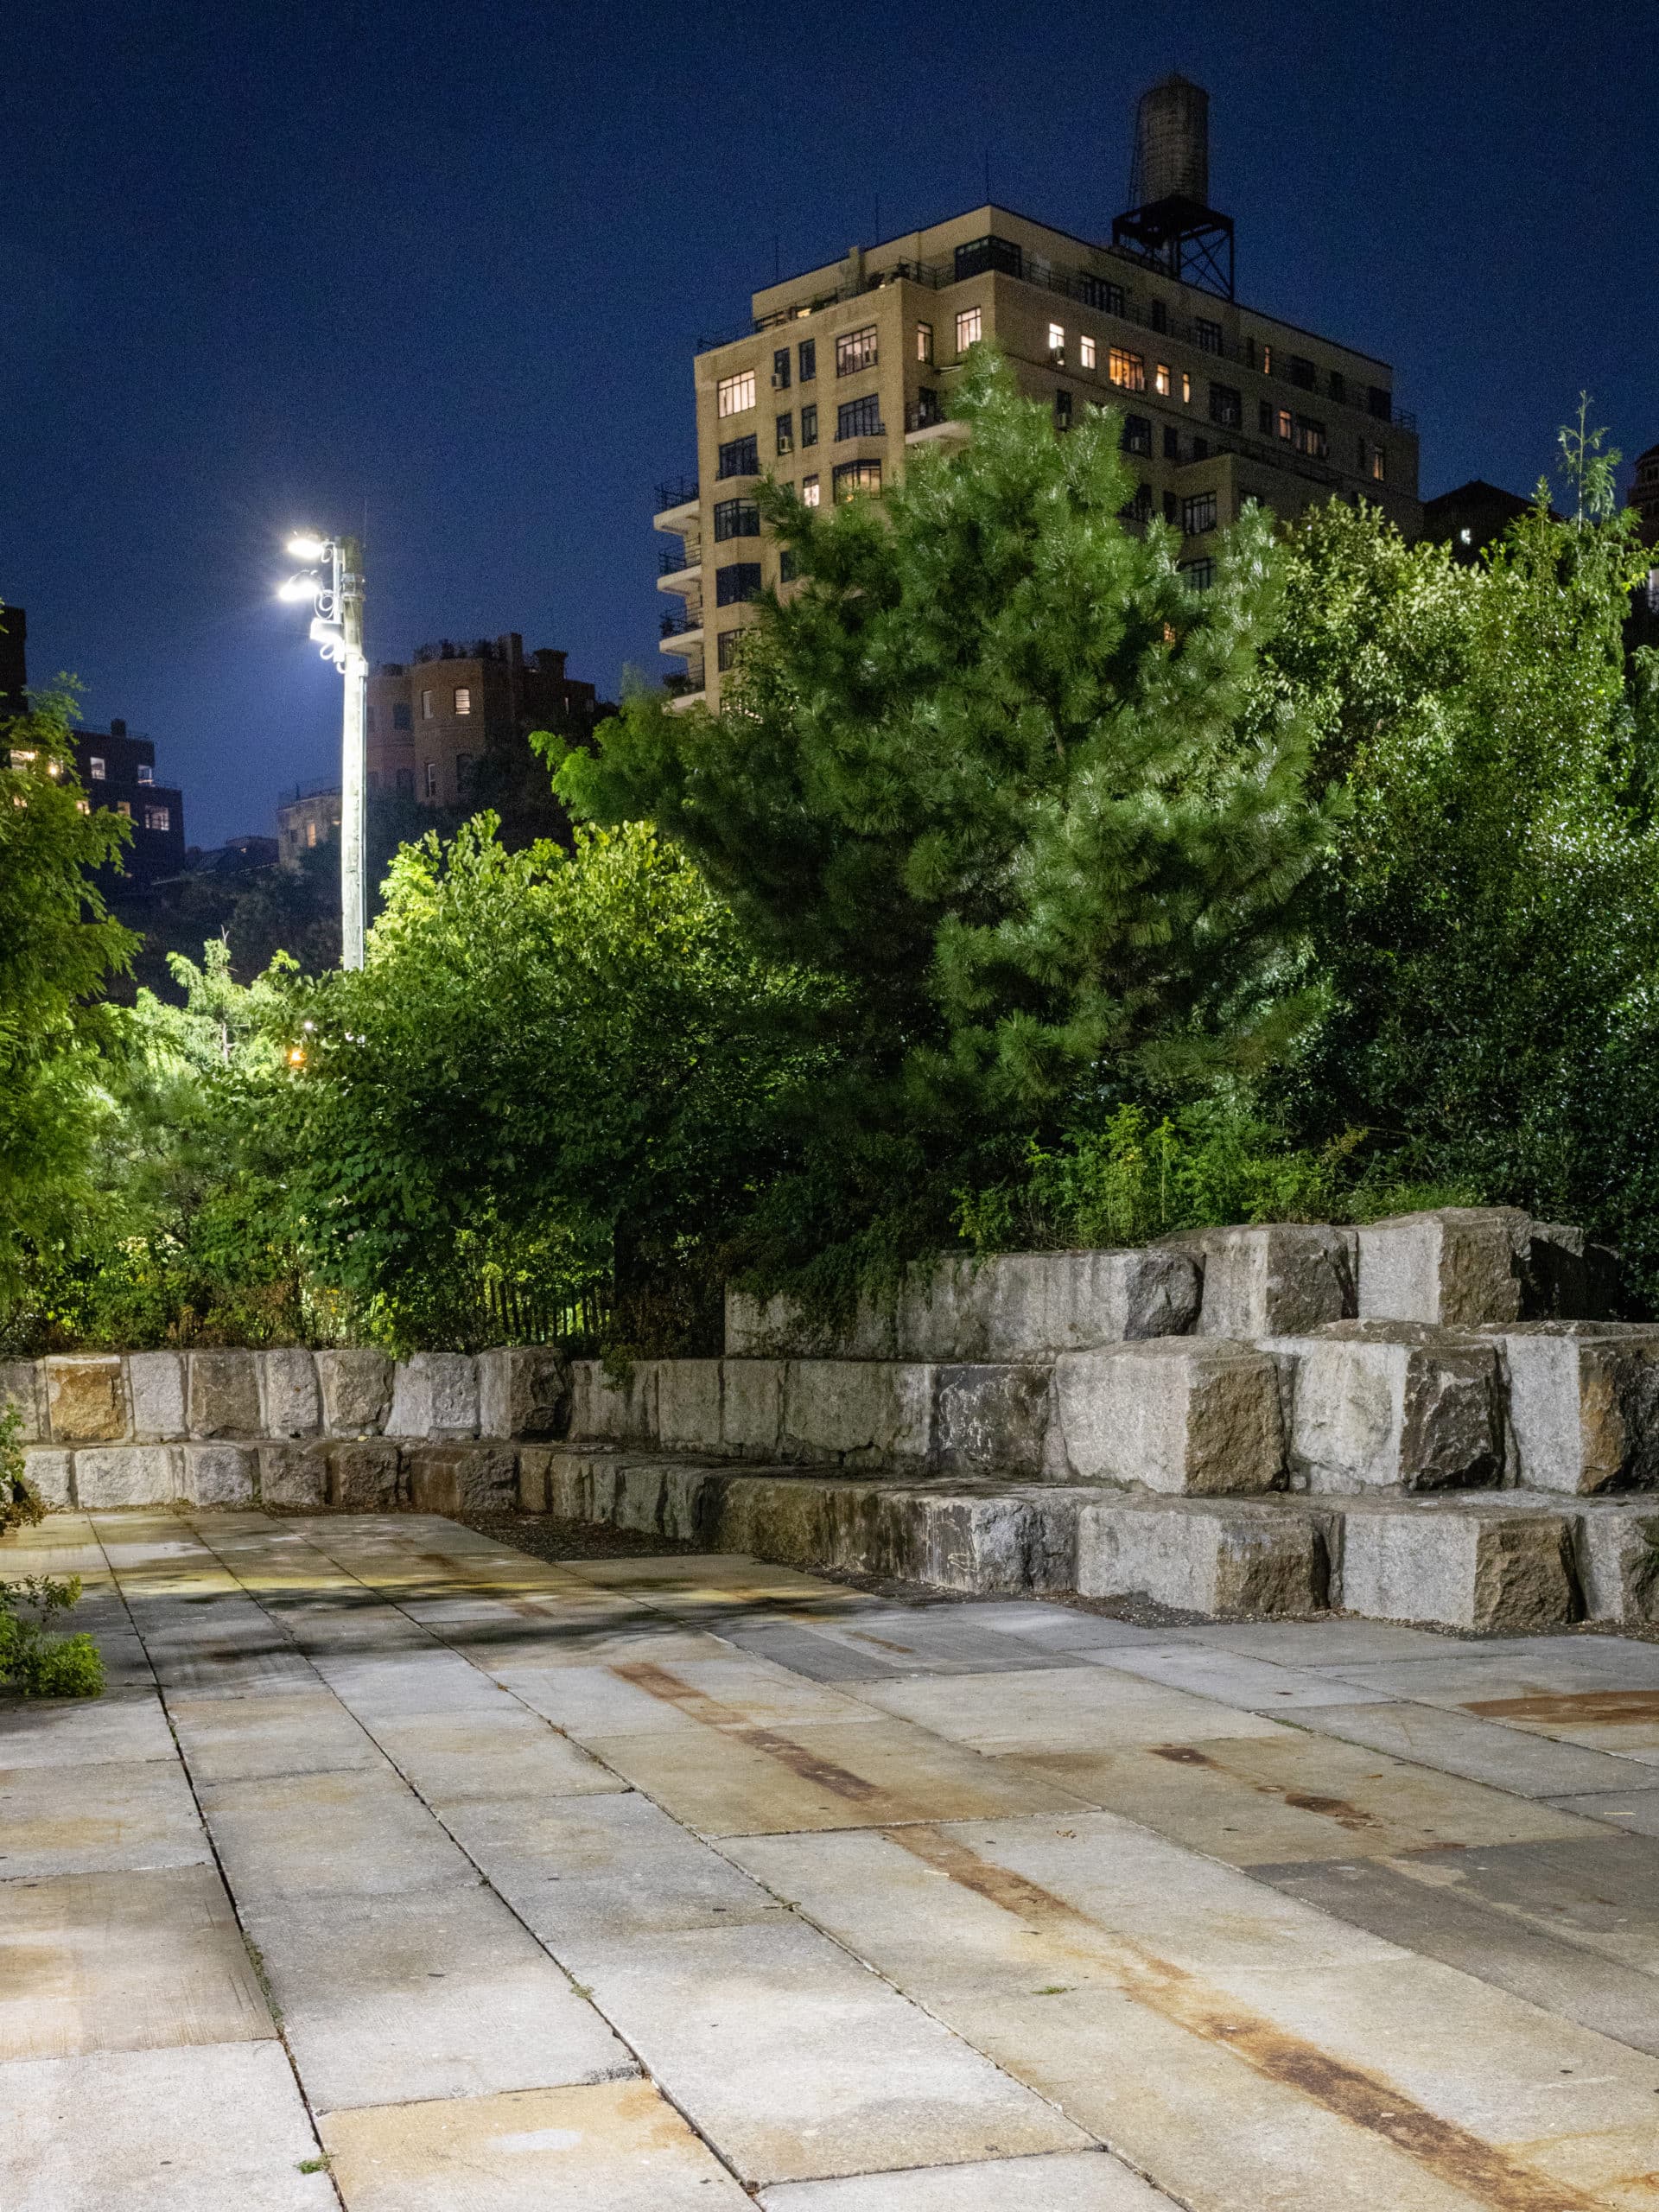 Stacked granite blocks under the trees on the Granite Terrace at night.